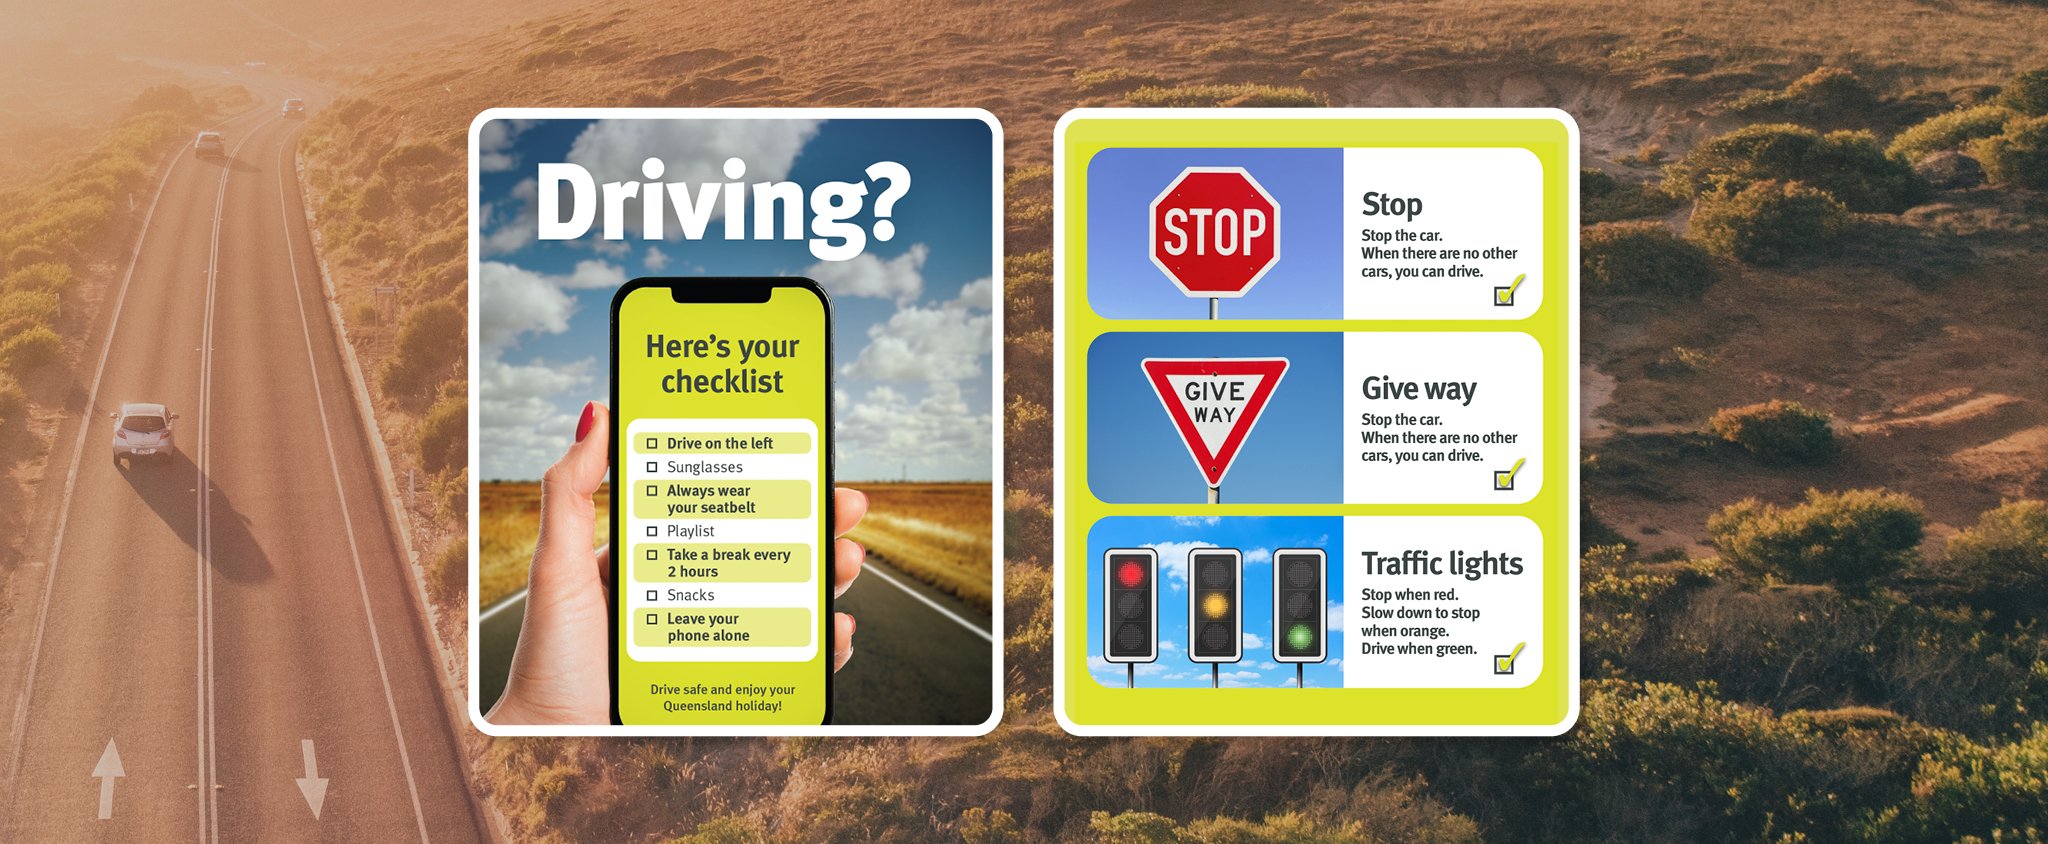 Essential tips for driving safely in Australia